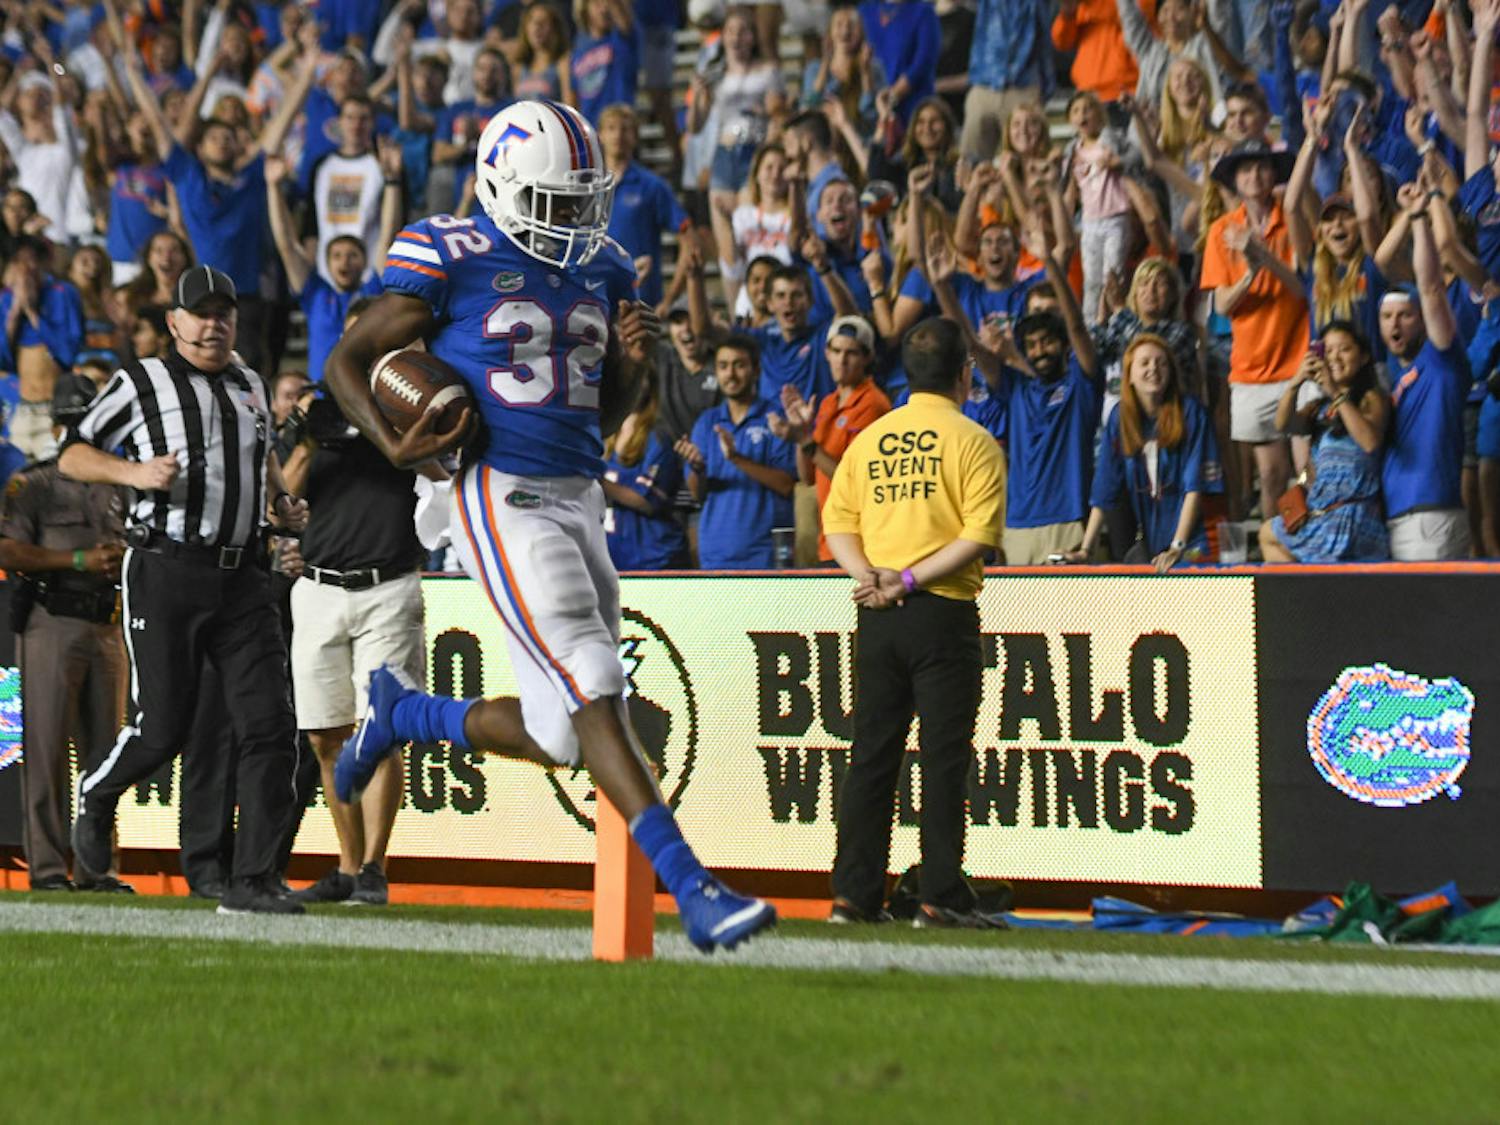 Adarius Lemons rushed for a team-high and career-high 89 yards on 11 carries during Florida’s 36-7 win on Saturday.